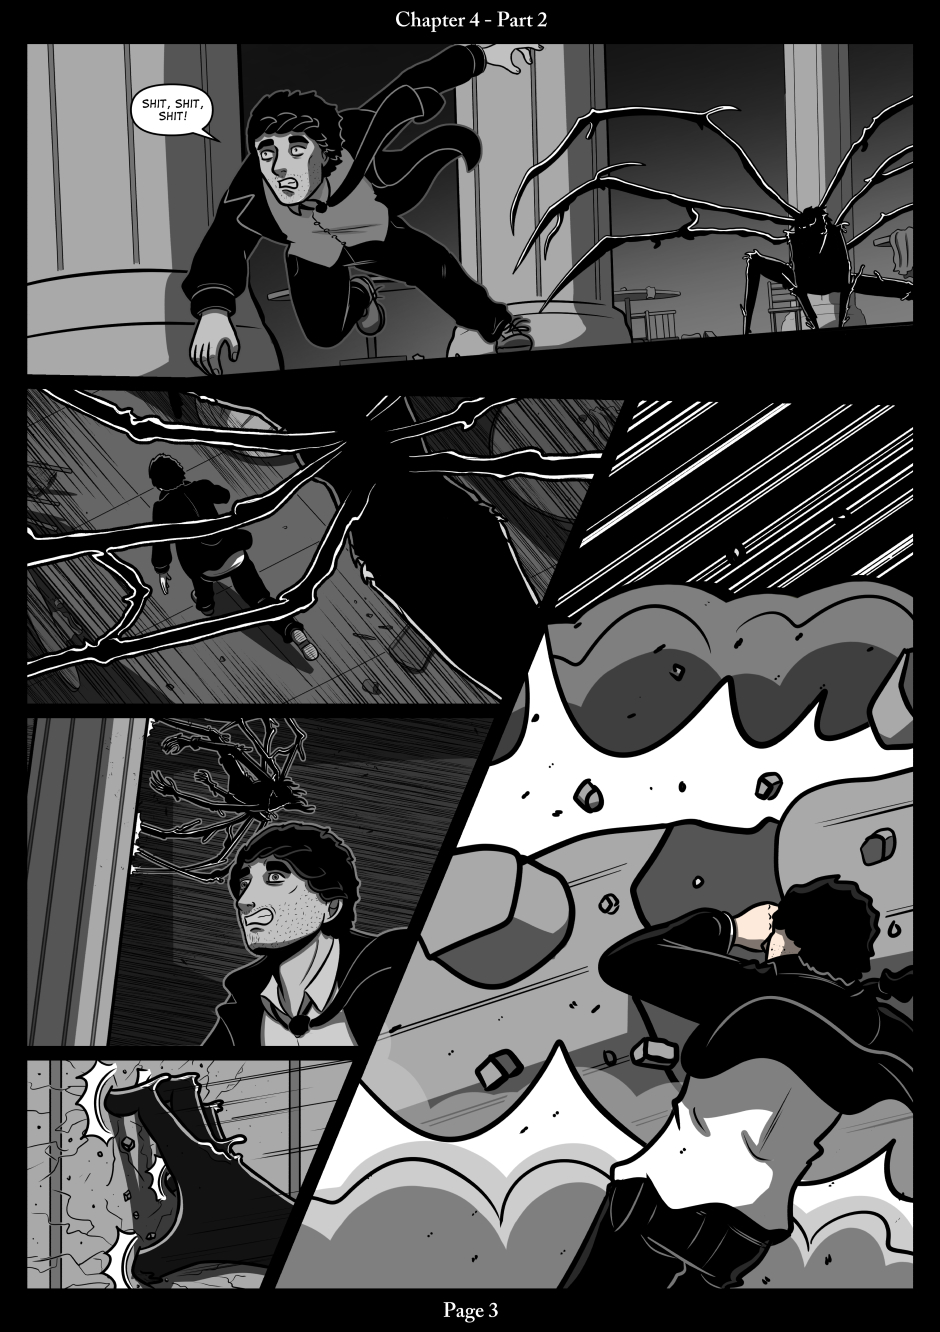 Chapter 4, Part 2 - Page 3